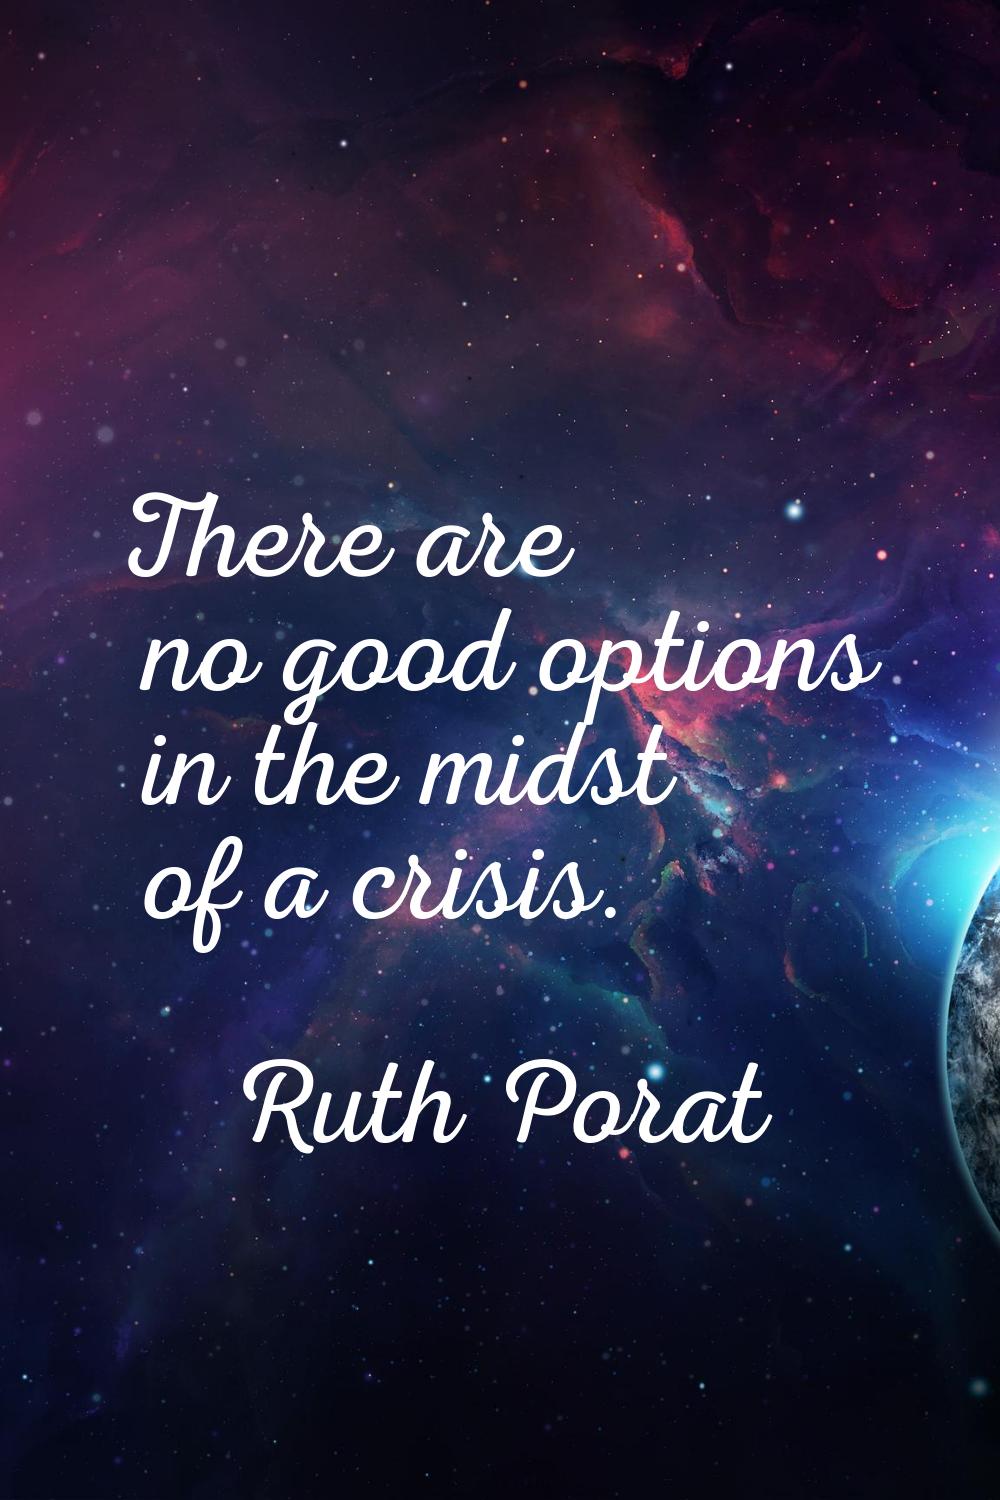 There are no good options in the midst of a crisis.